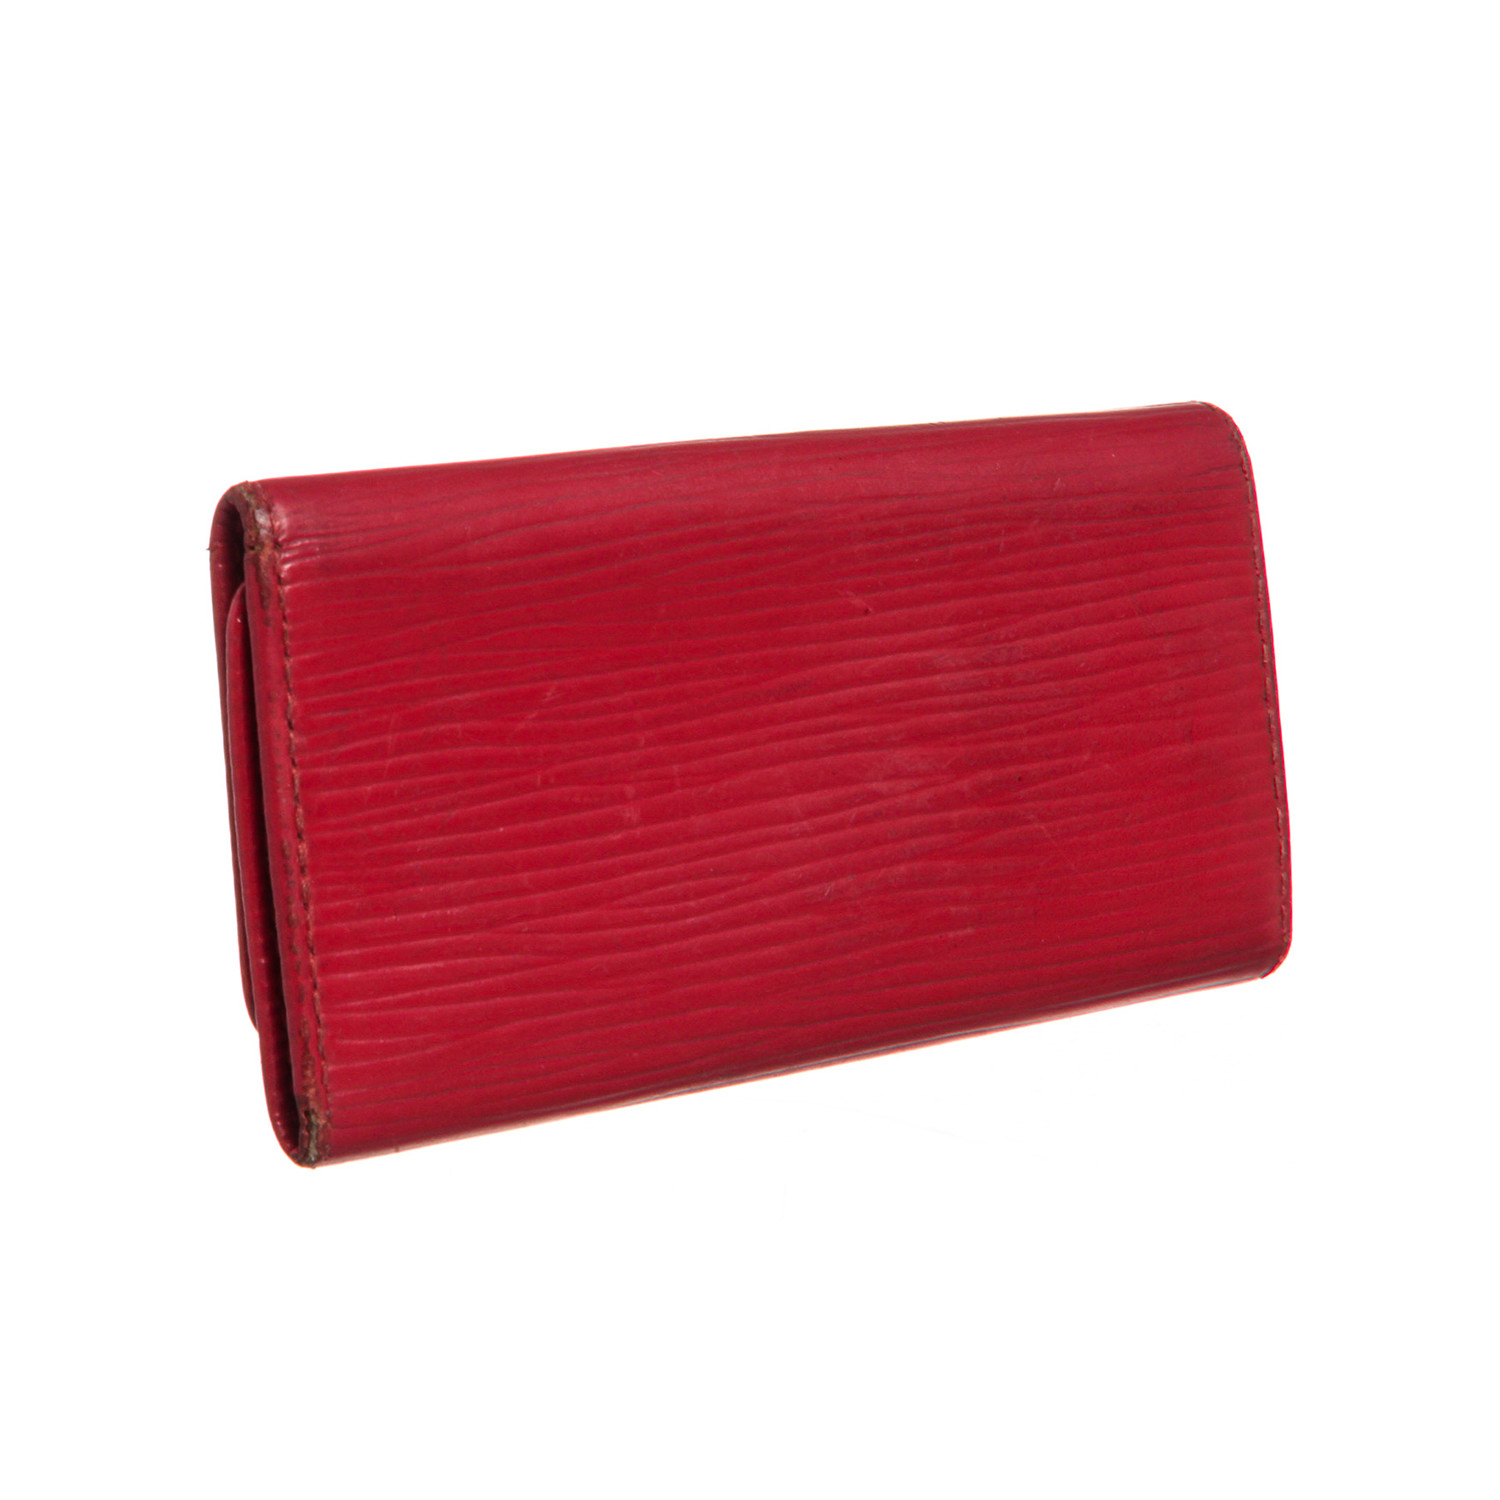 Louis Vuitton // Epi Leather 4 Key Holder // Red V1 // Pre-Owned - Pre-Owned Designer Bags ...